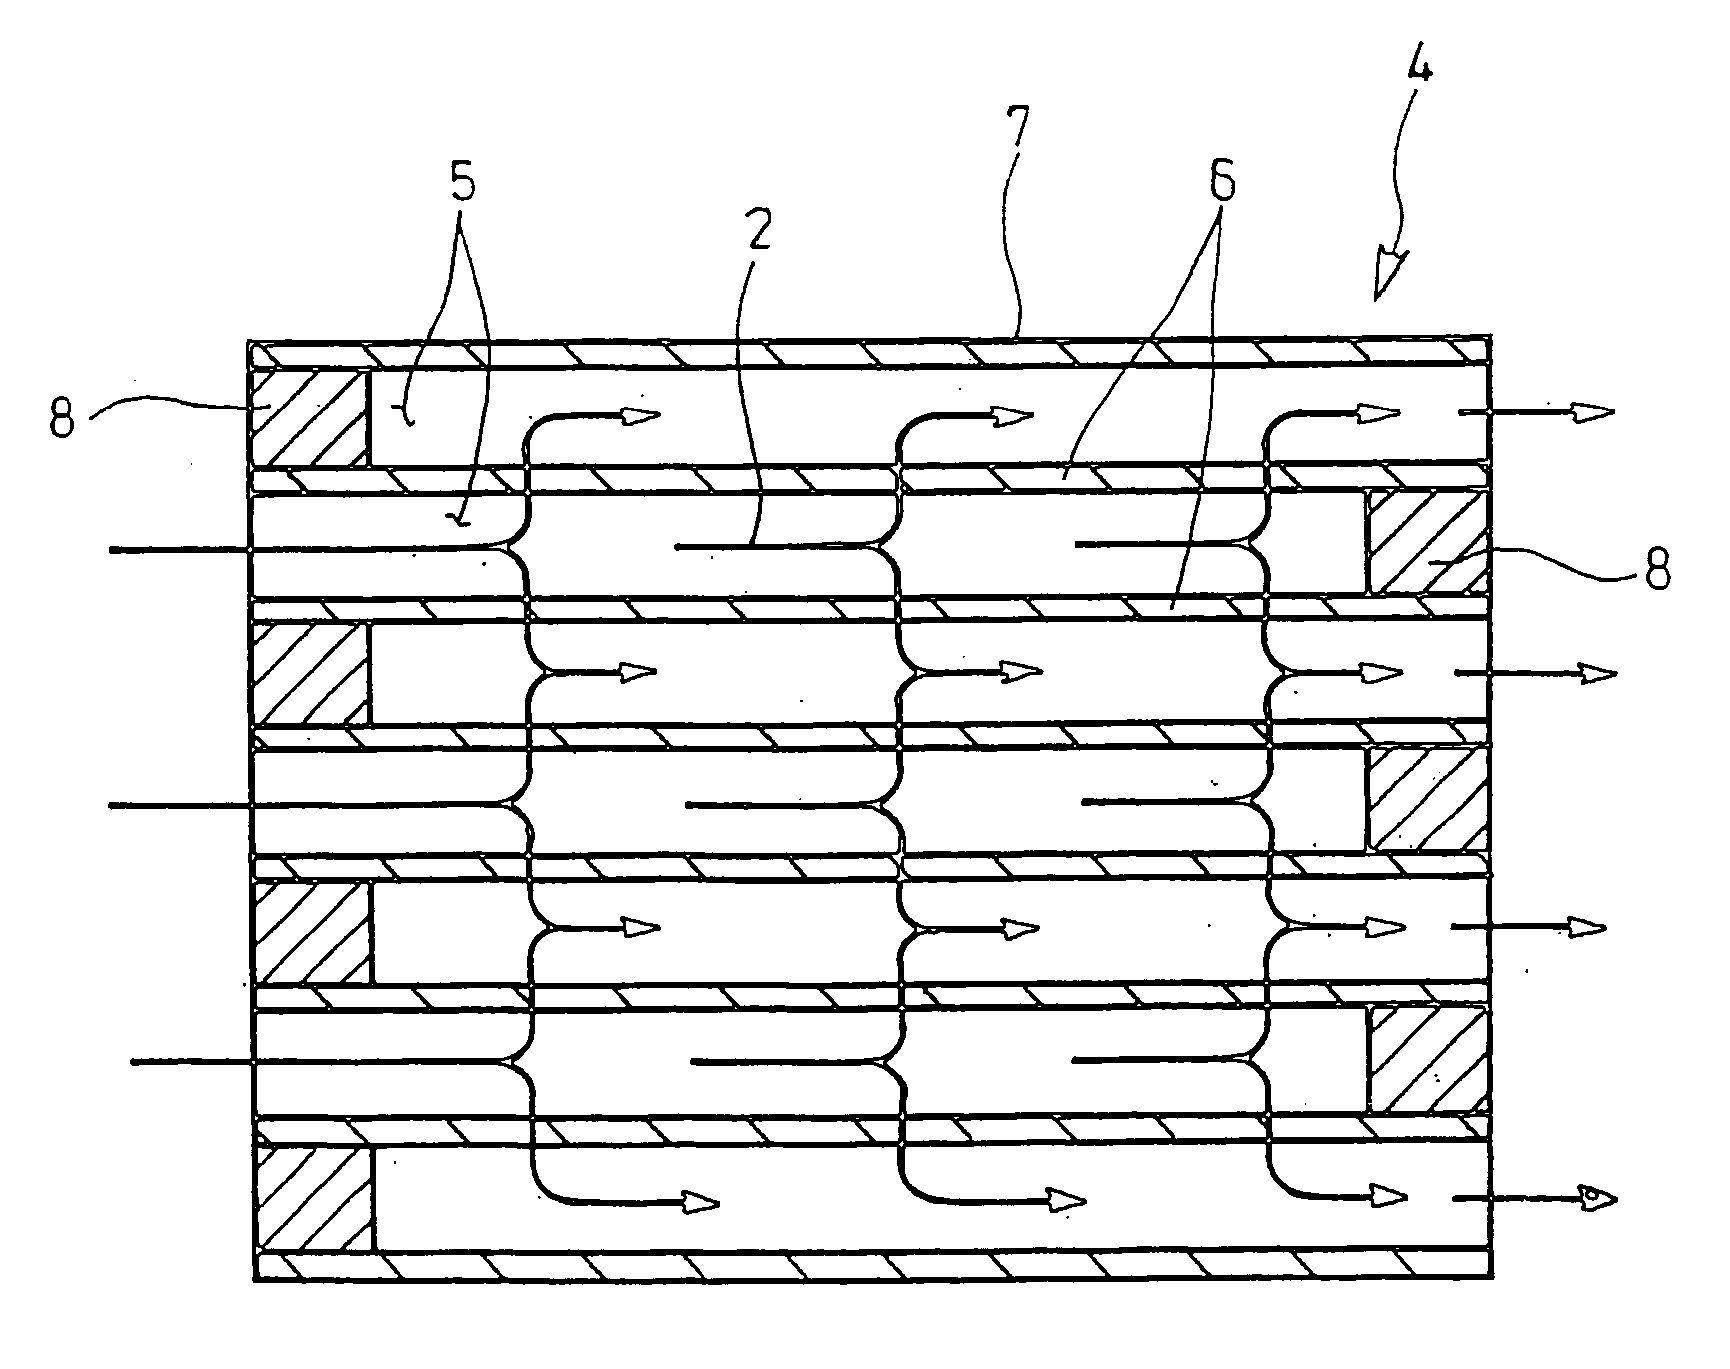 Exhaust gas-purifying device